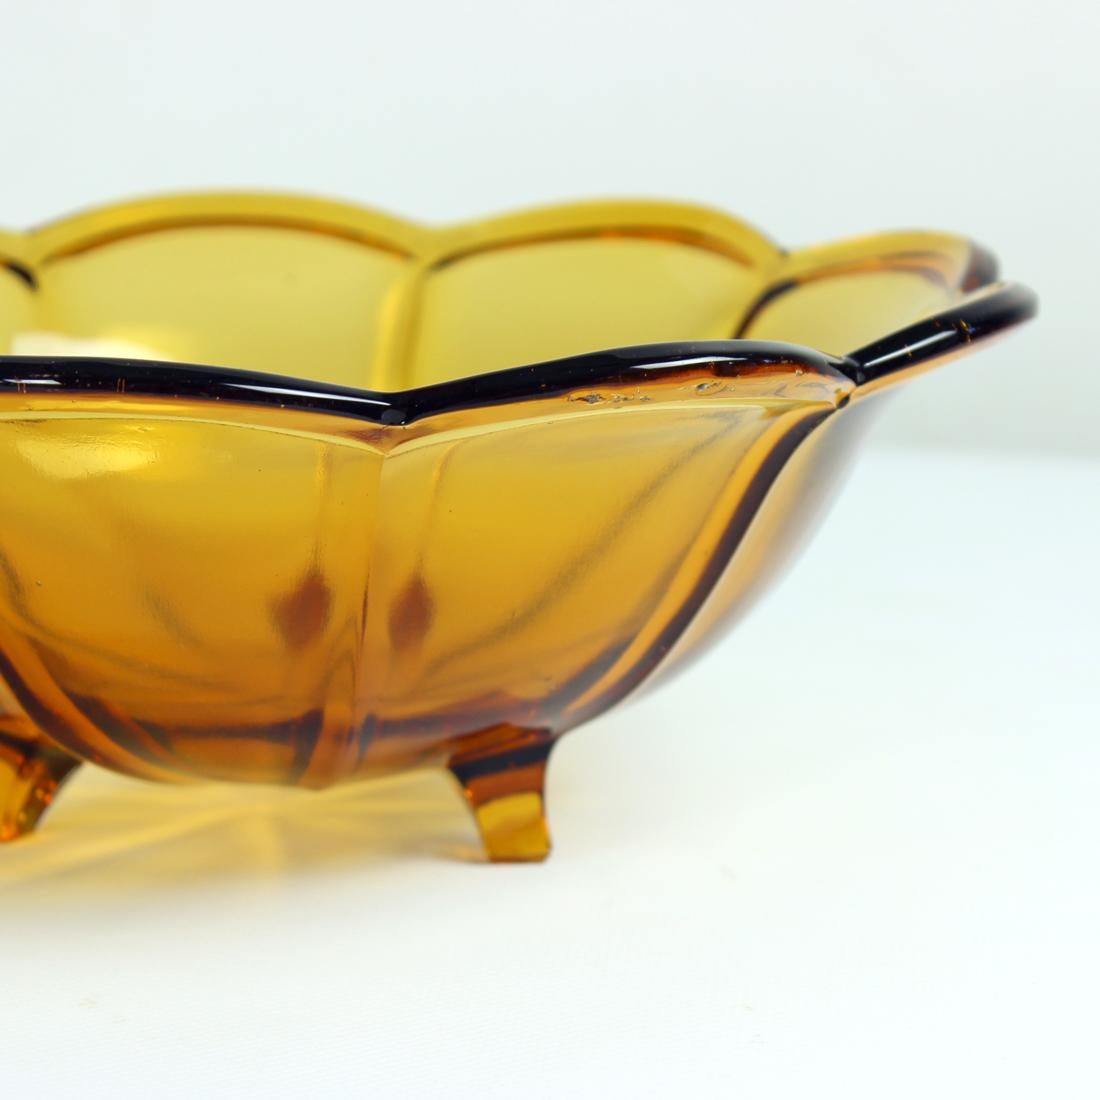 Beautiful glass bowl produced by Borske Sklo Union in 1960s in an unussual amber glass. The bowl is marked in an official catalogue as a model 19484. It is in an excellent condition. There are a few bubbles in the glass, but this is originally made